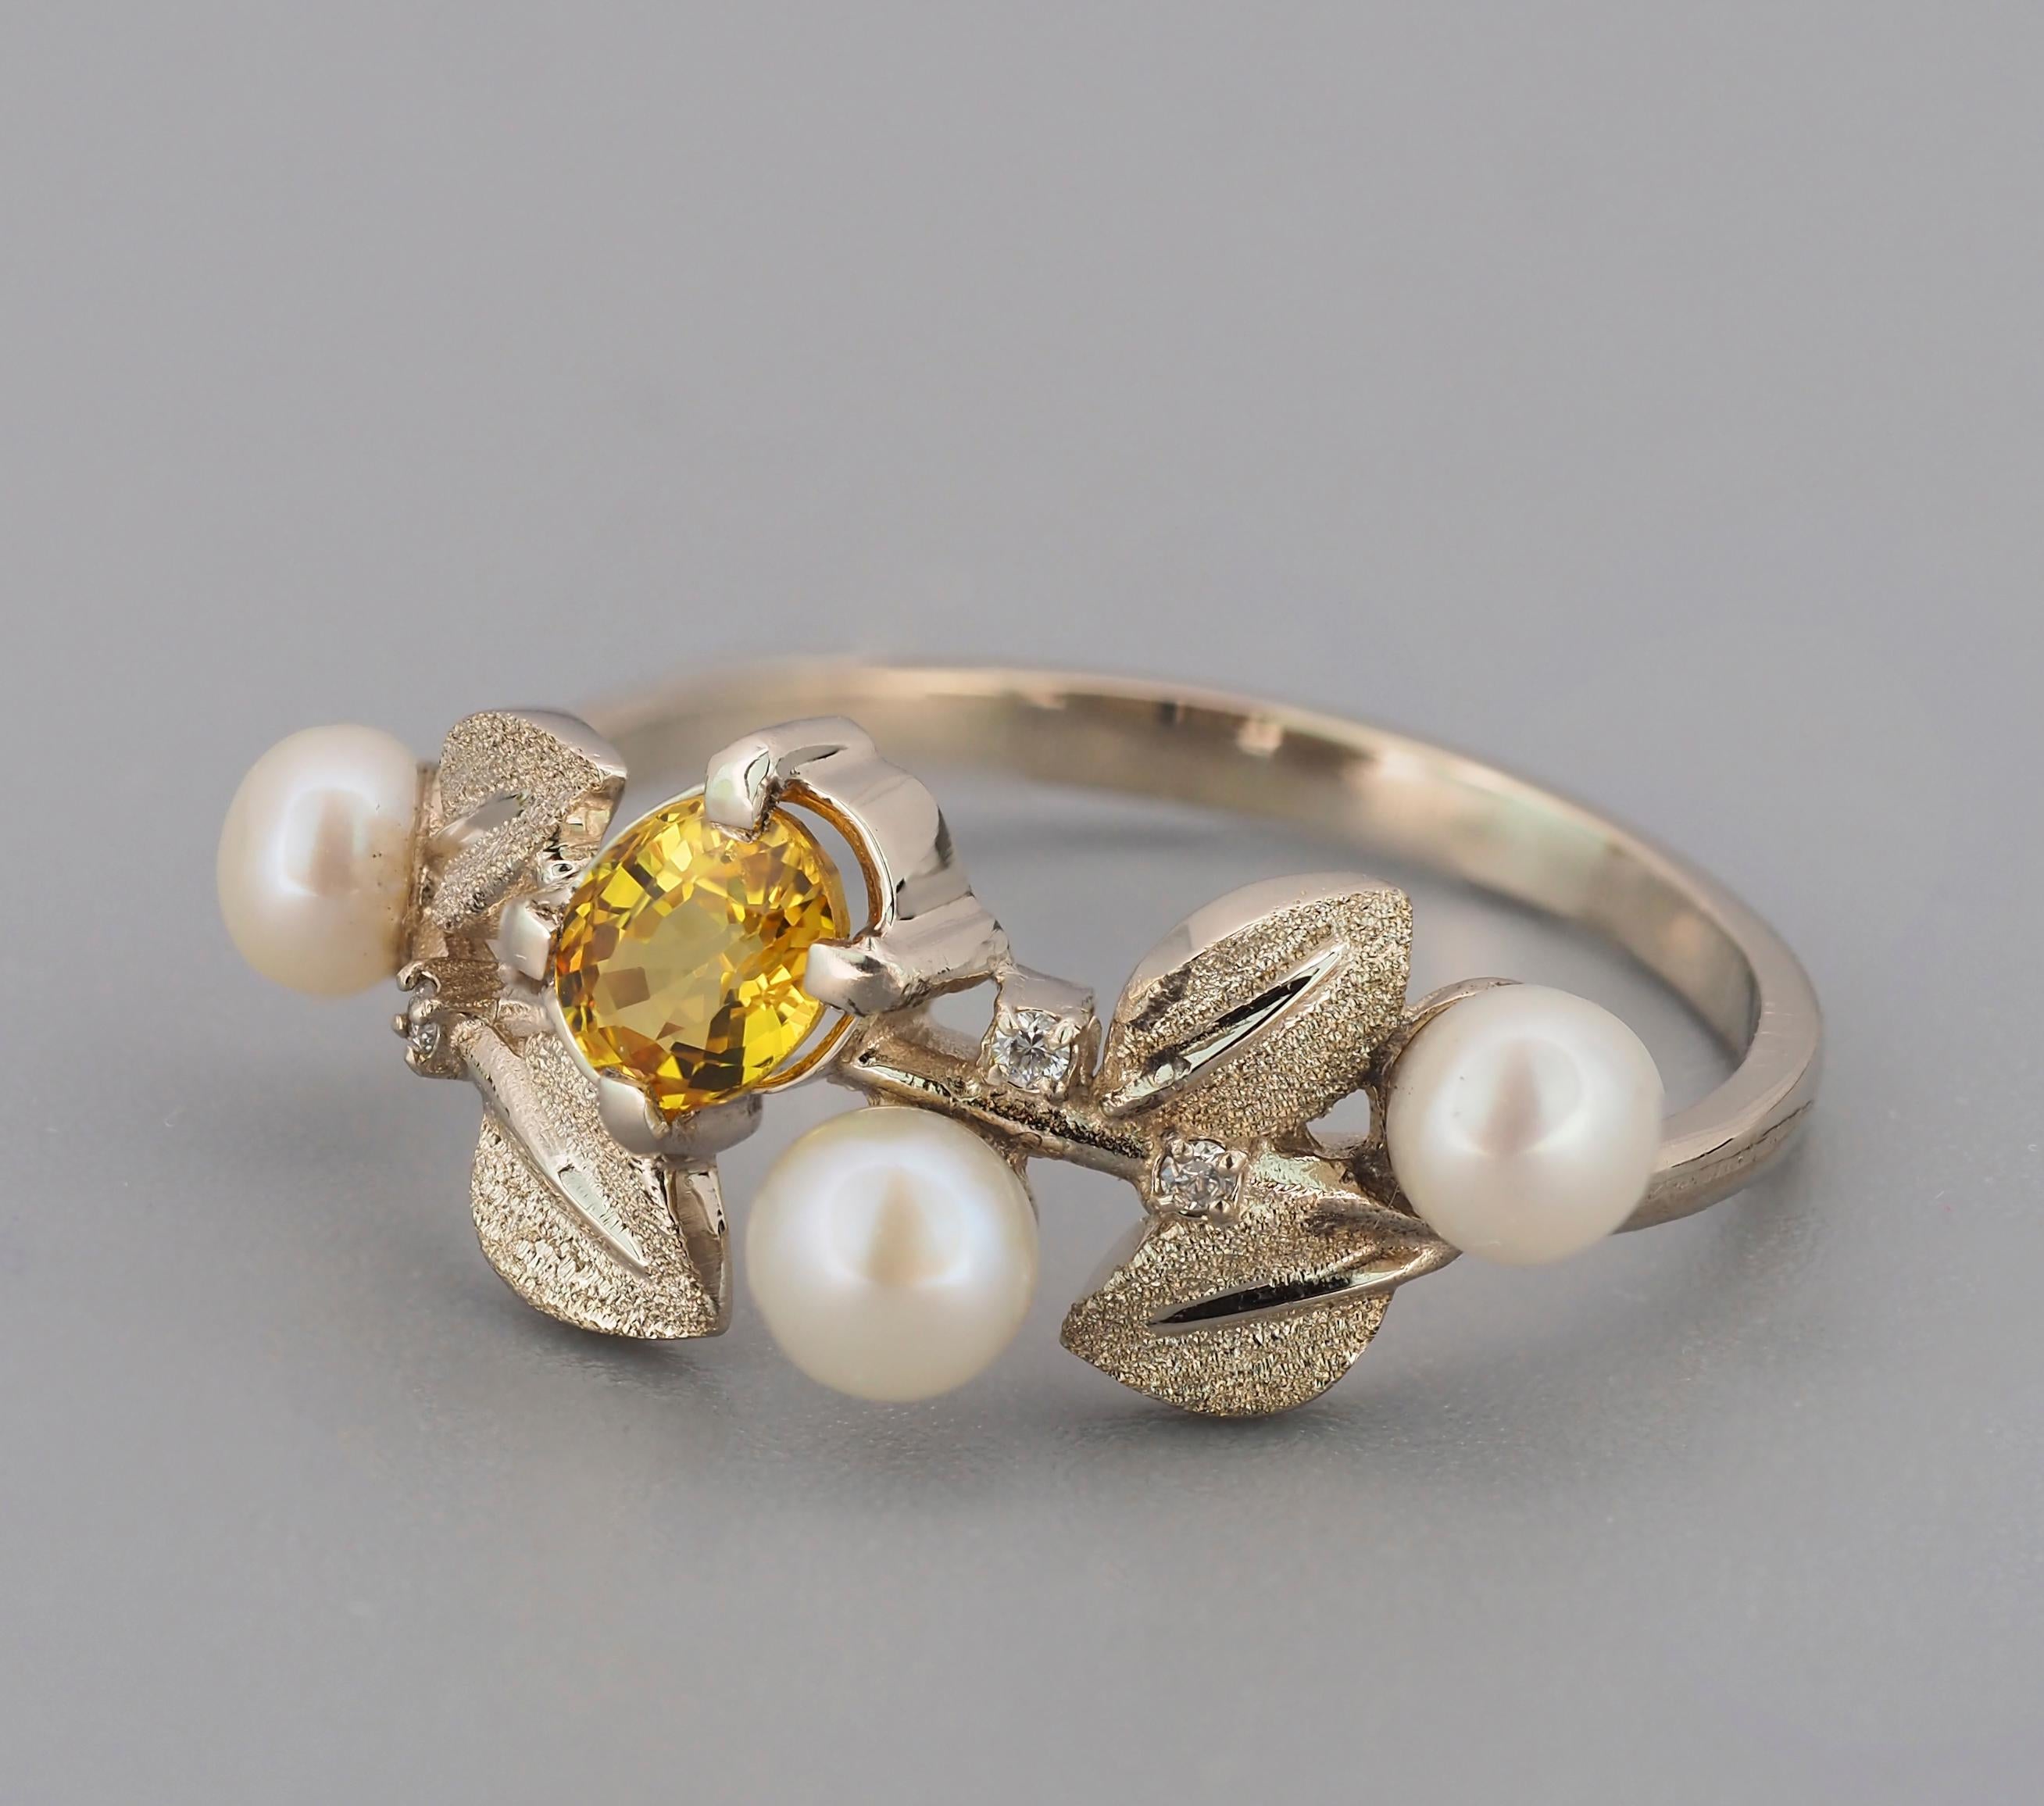 For Sale:  14k Gold Floral Ring with Sapphire, Diamonds and Pearls 4